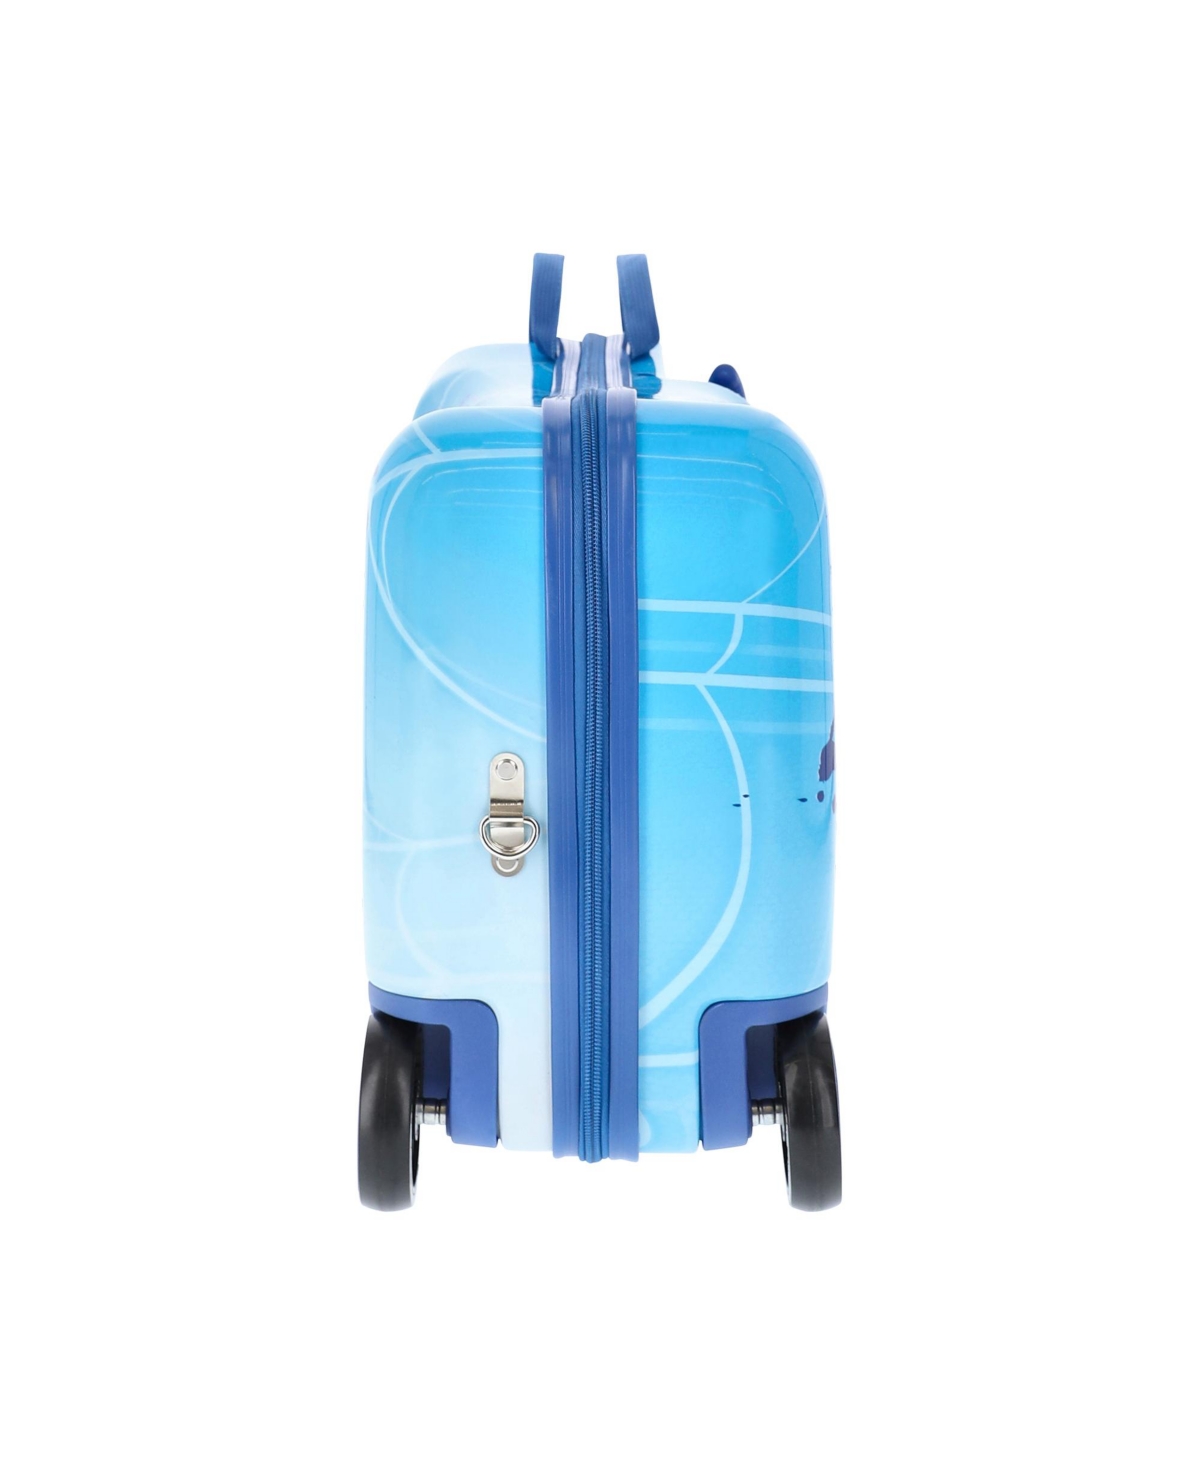 Shop Ful Marvel  Ride-on Luggage Spiderman Kids 14.5" Luggage In Blue